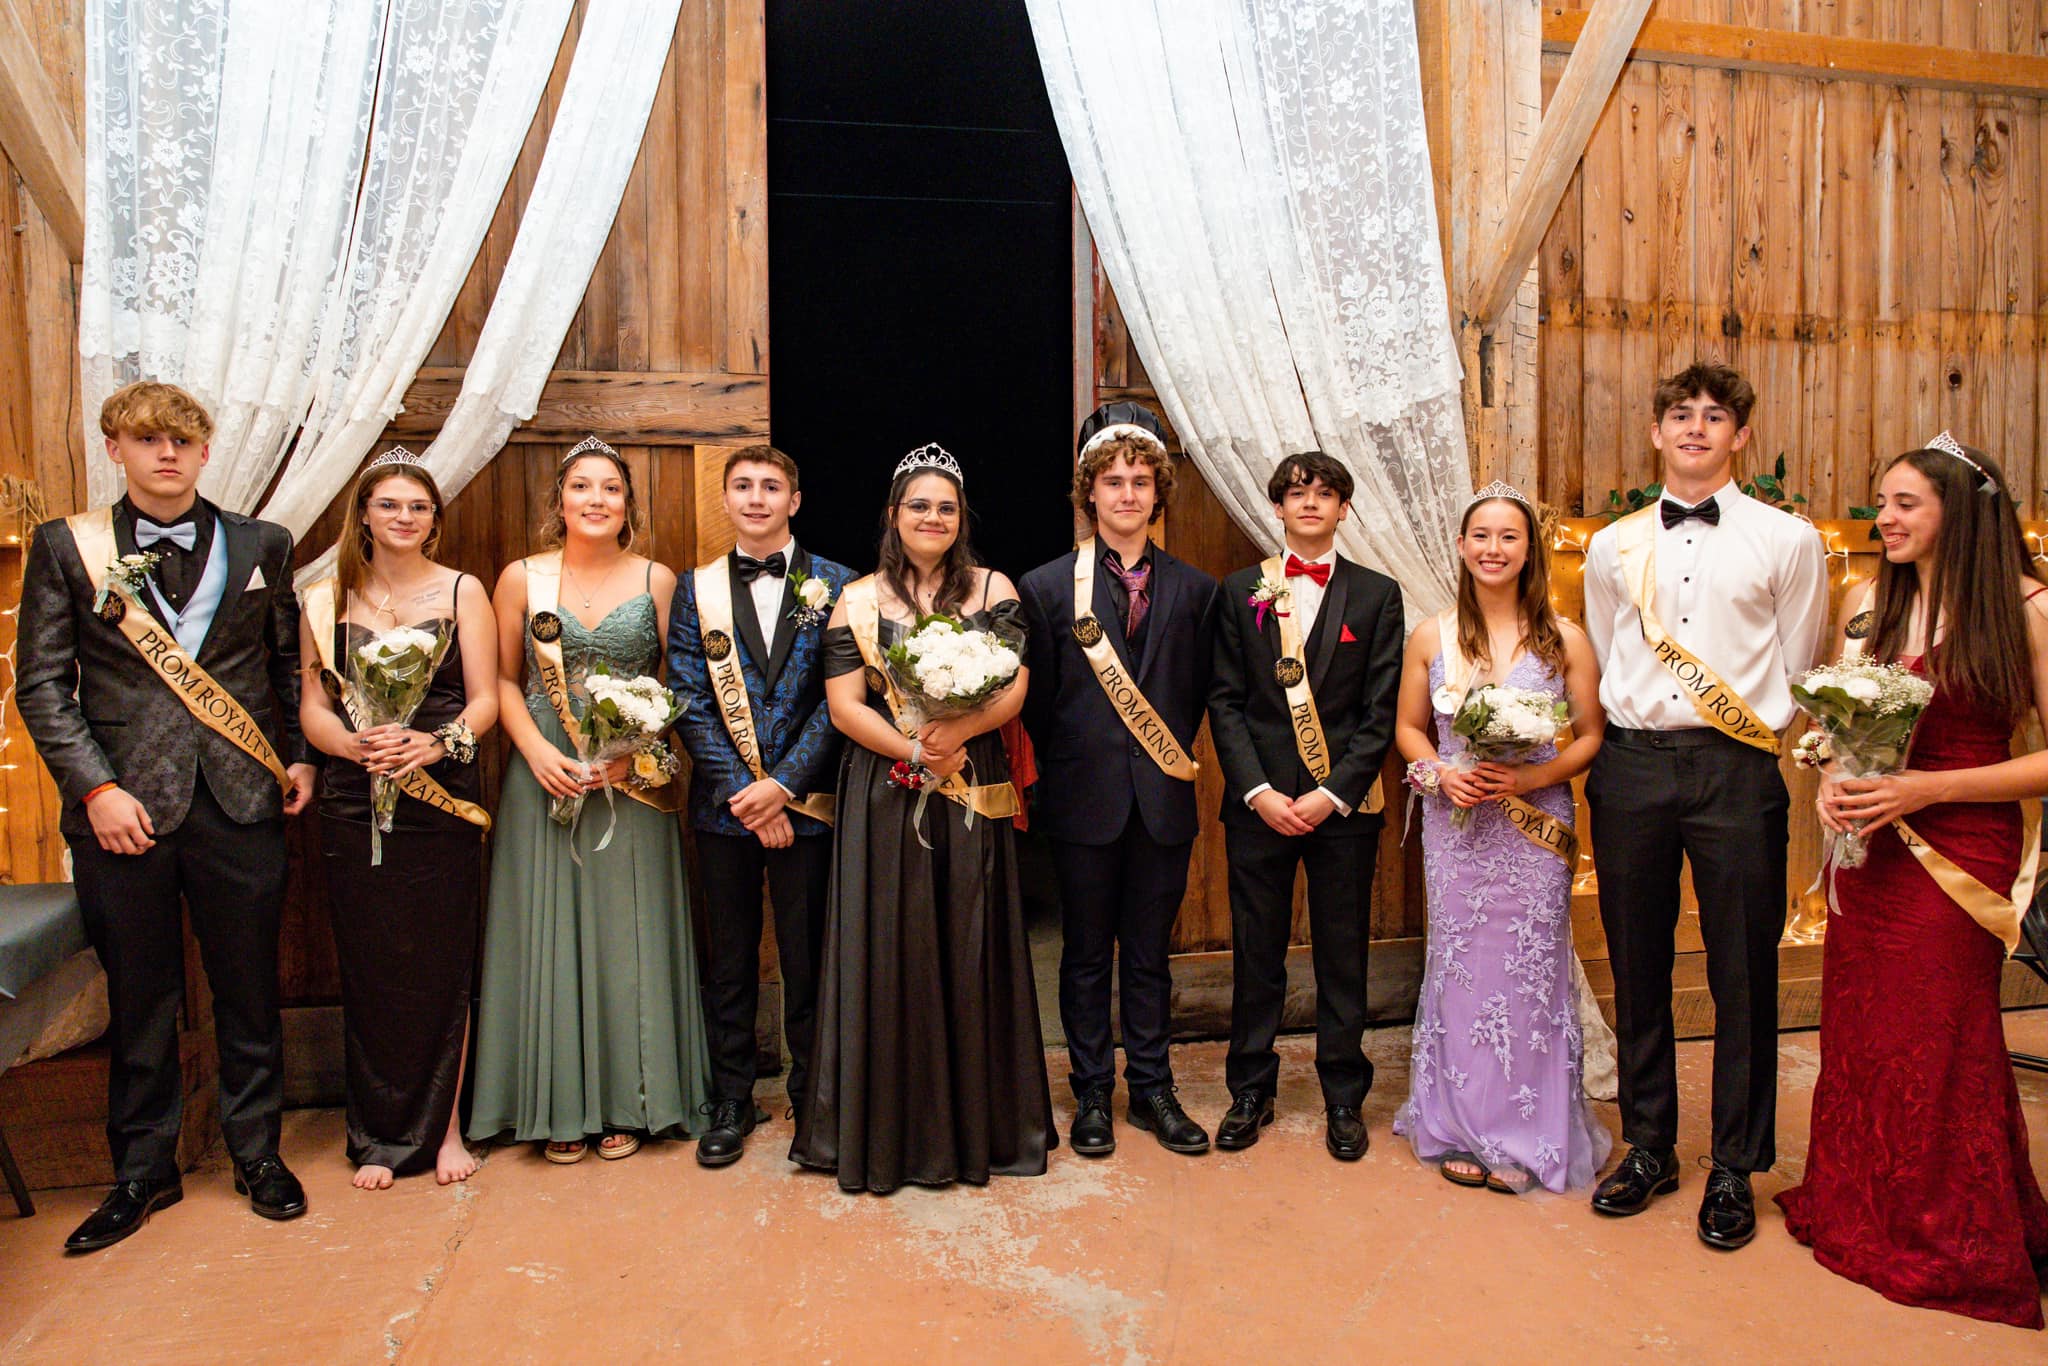 A prom court poses for a photo